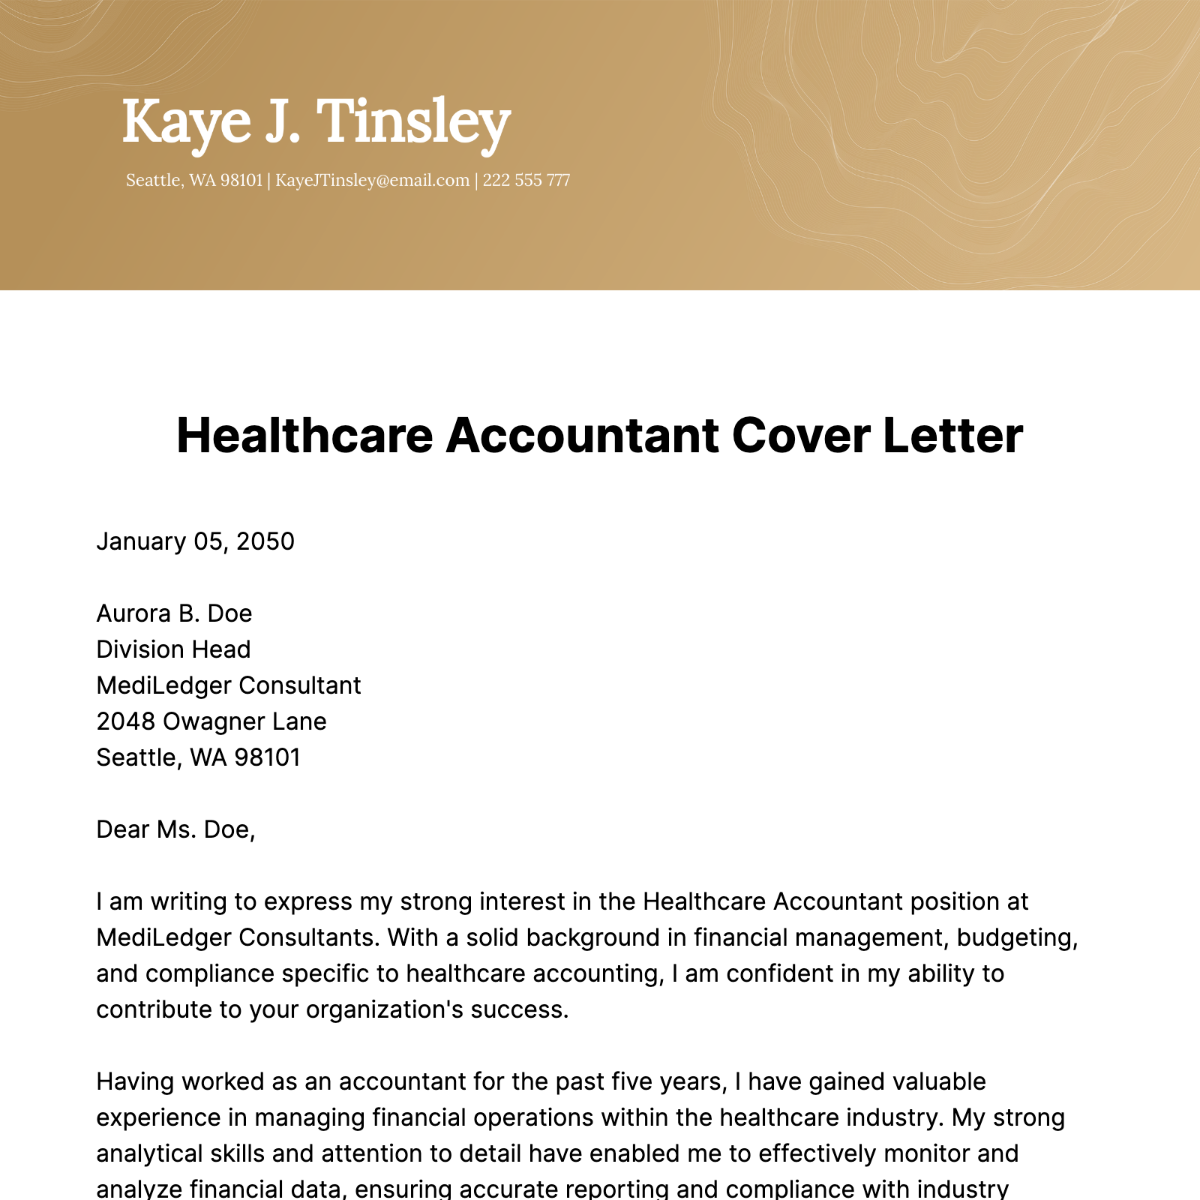 Healthcare Accountant Cover Letter Template